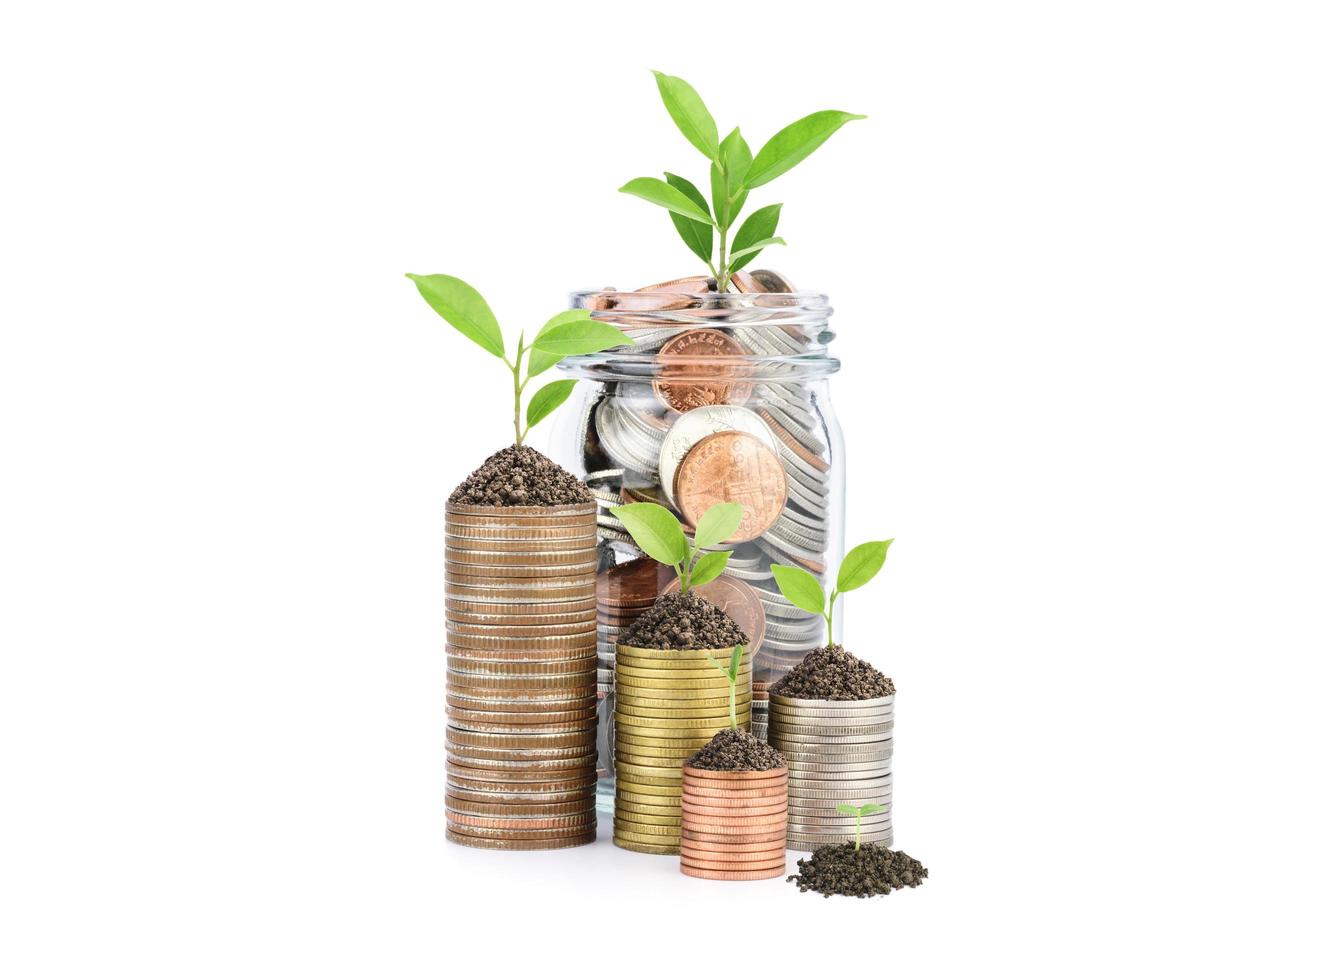 Coins and plants are planted on a pile of coins. Ideas for investment finance Banking business growth, savings and productivity on white background photo